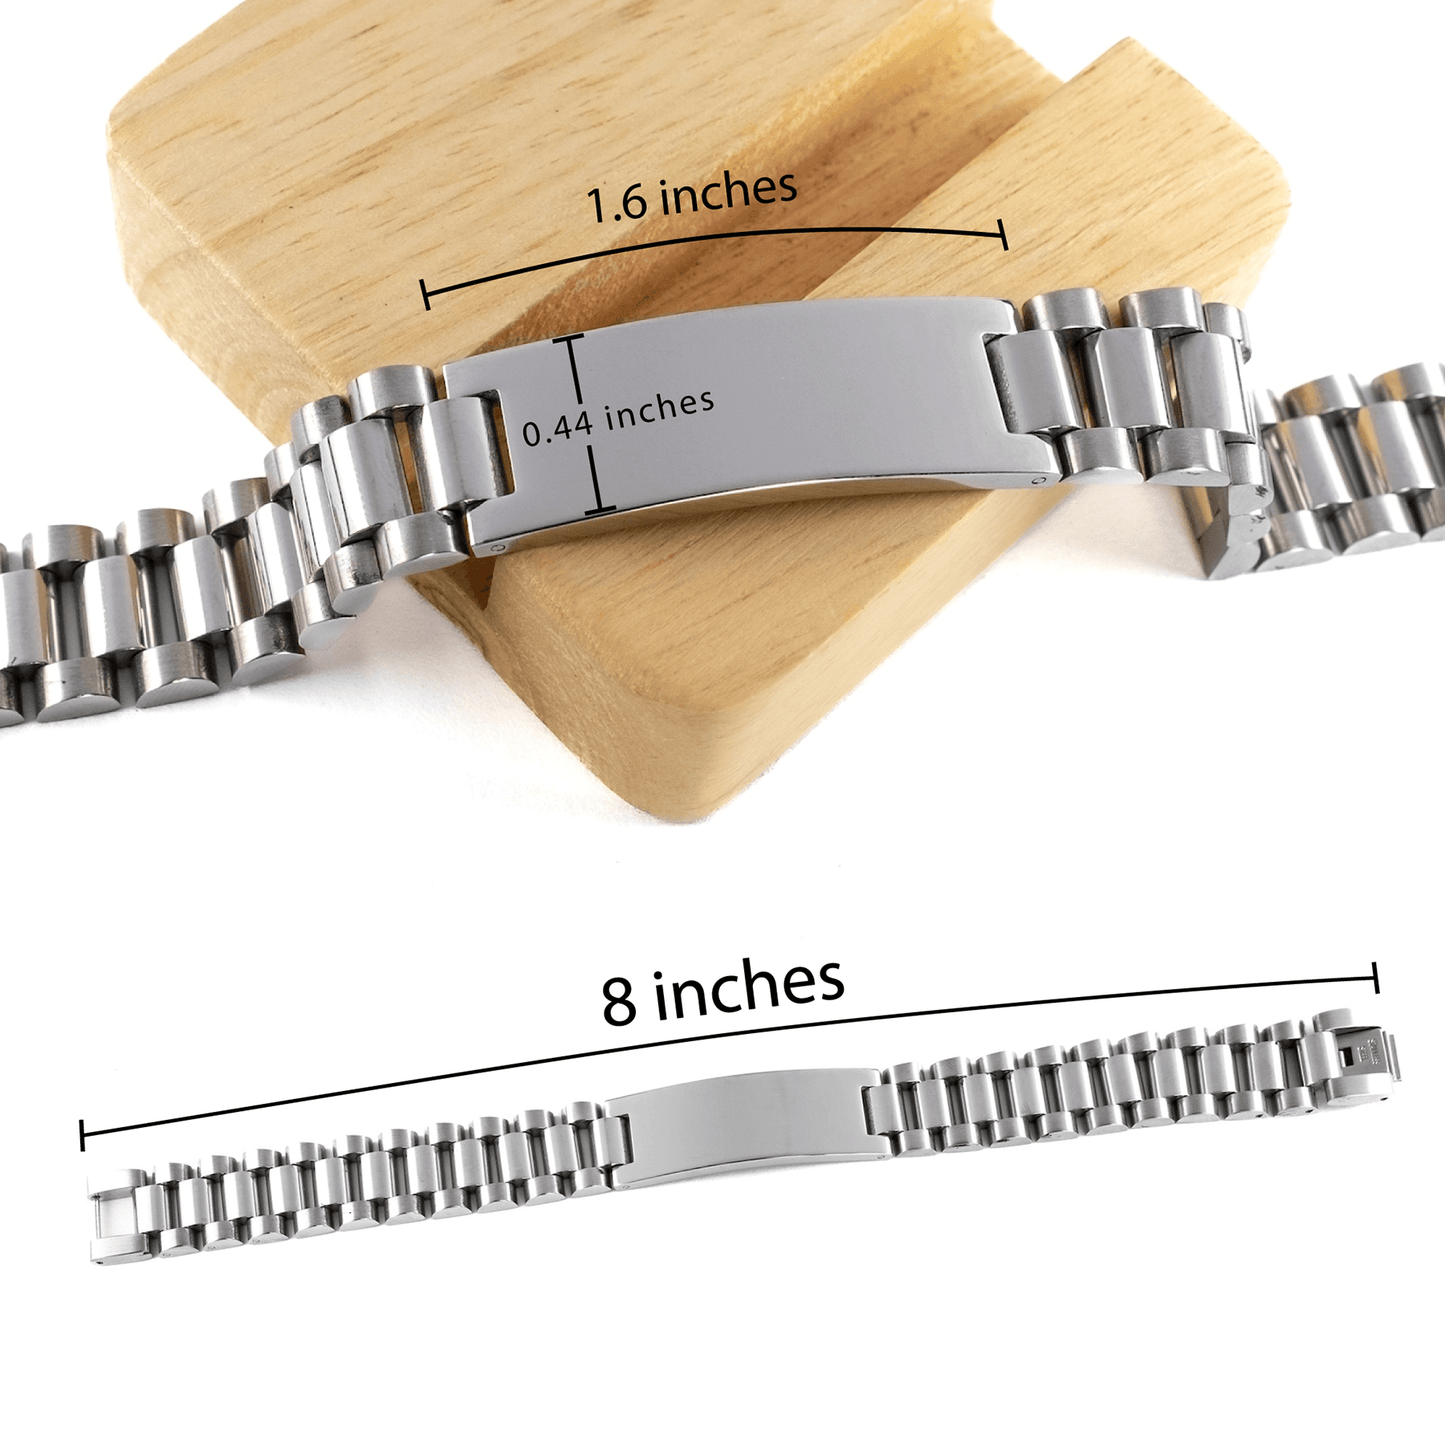 Game Warden Ladder Stainless Steel Engraved Bracelet - Thanks for being who you are - Birthday Christmas Jewelry Gifts Coworkers Colleague Boss - Mallard Moon Gift Shop